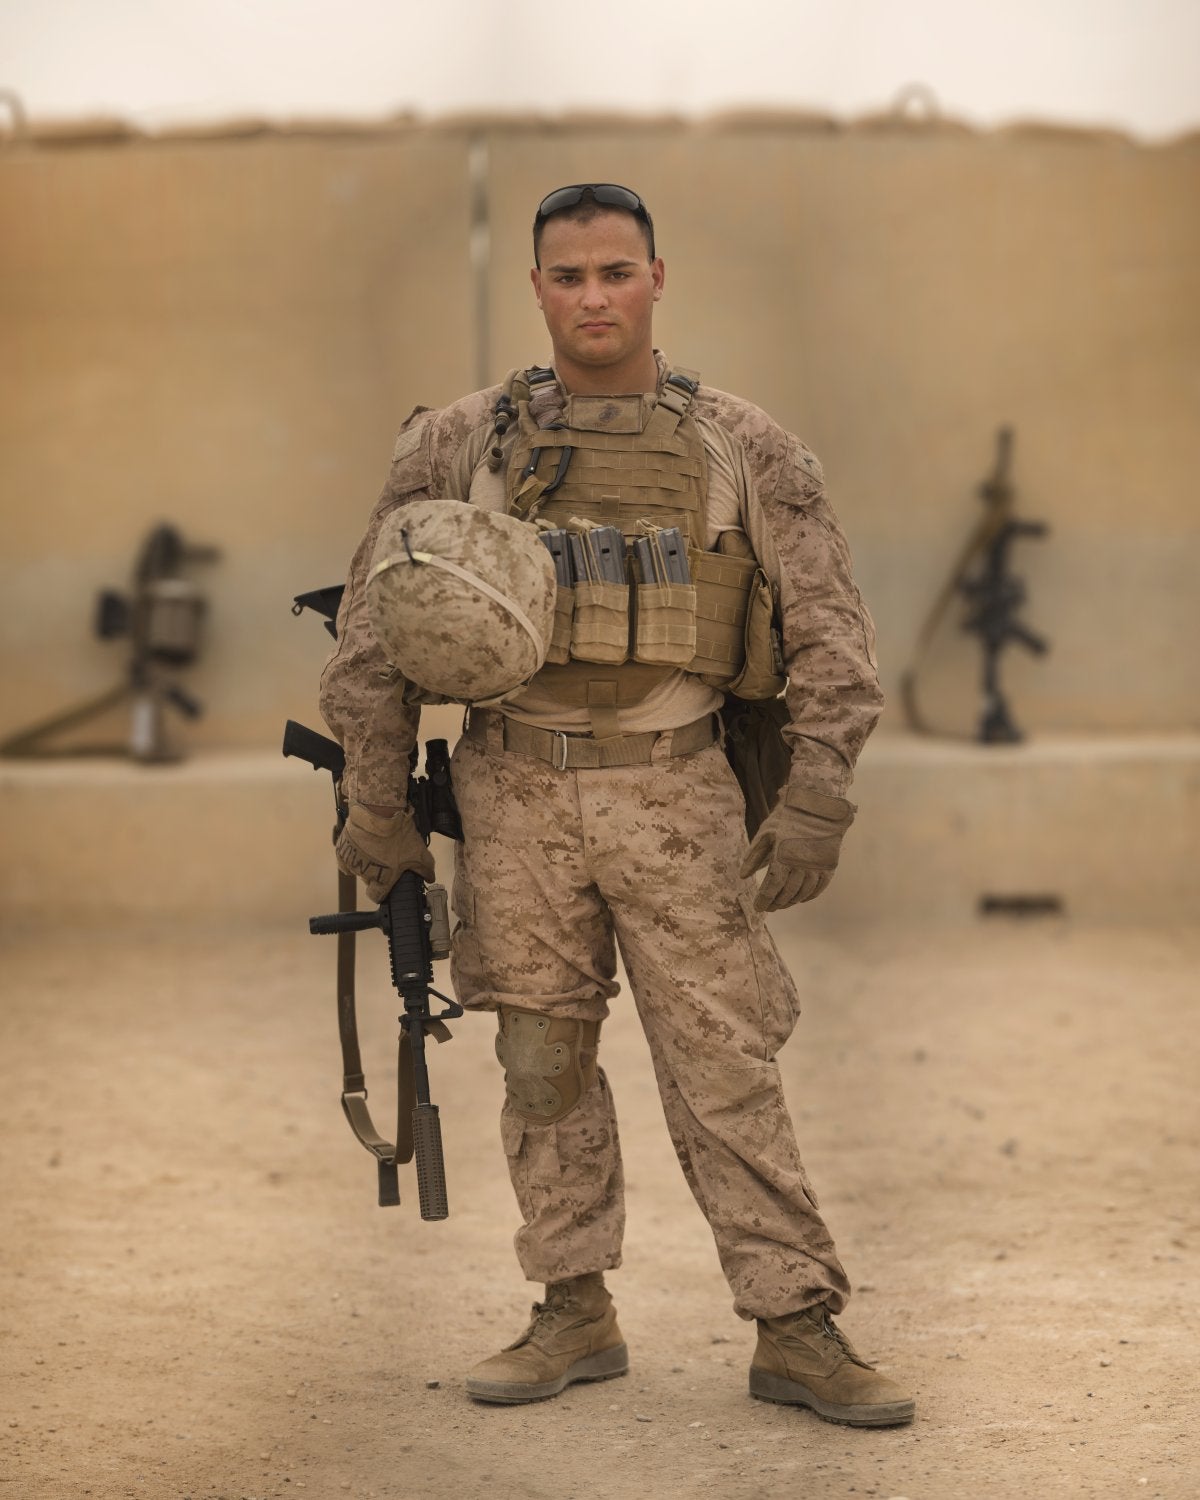 A US Marine photographer shot these beautiful portraits of troops overseas